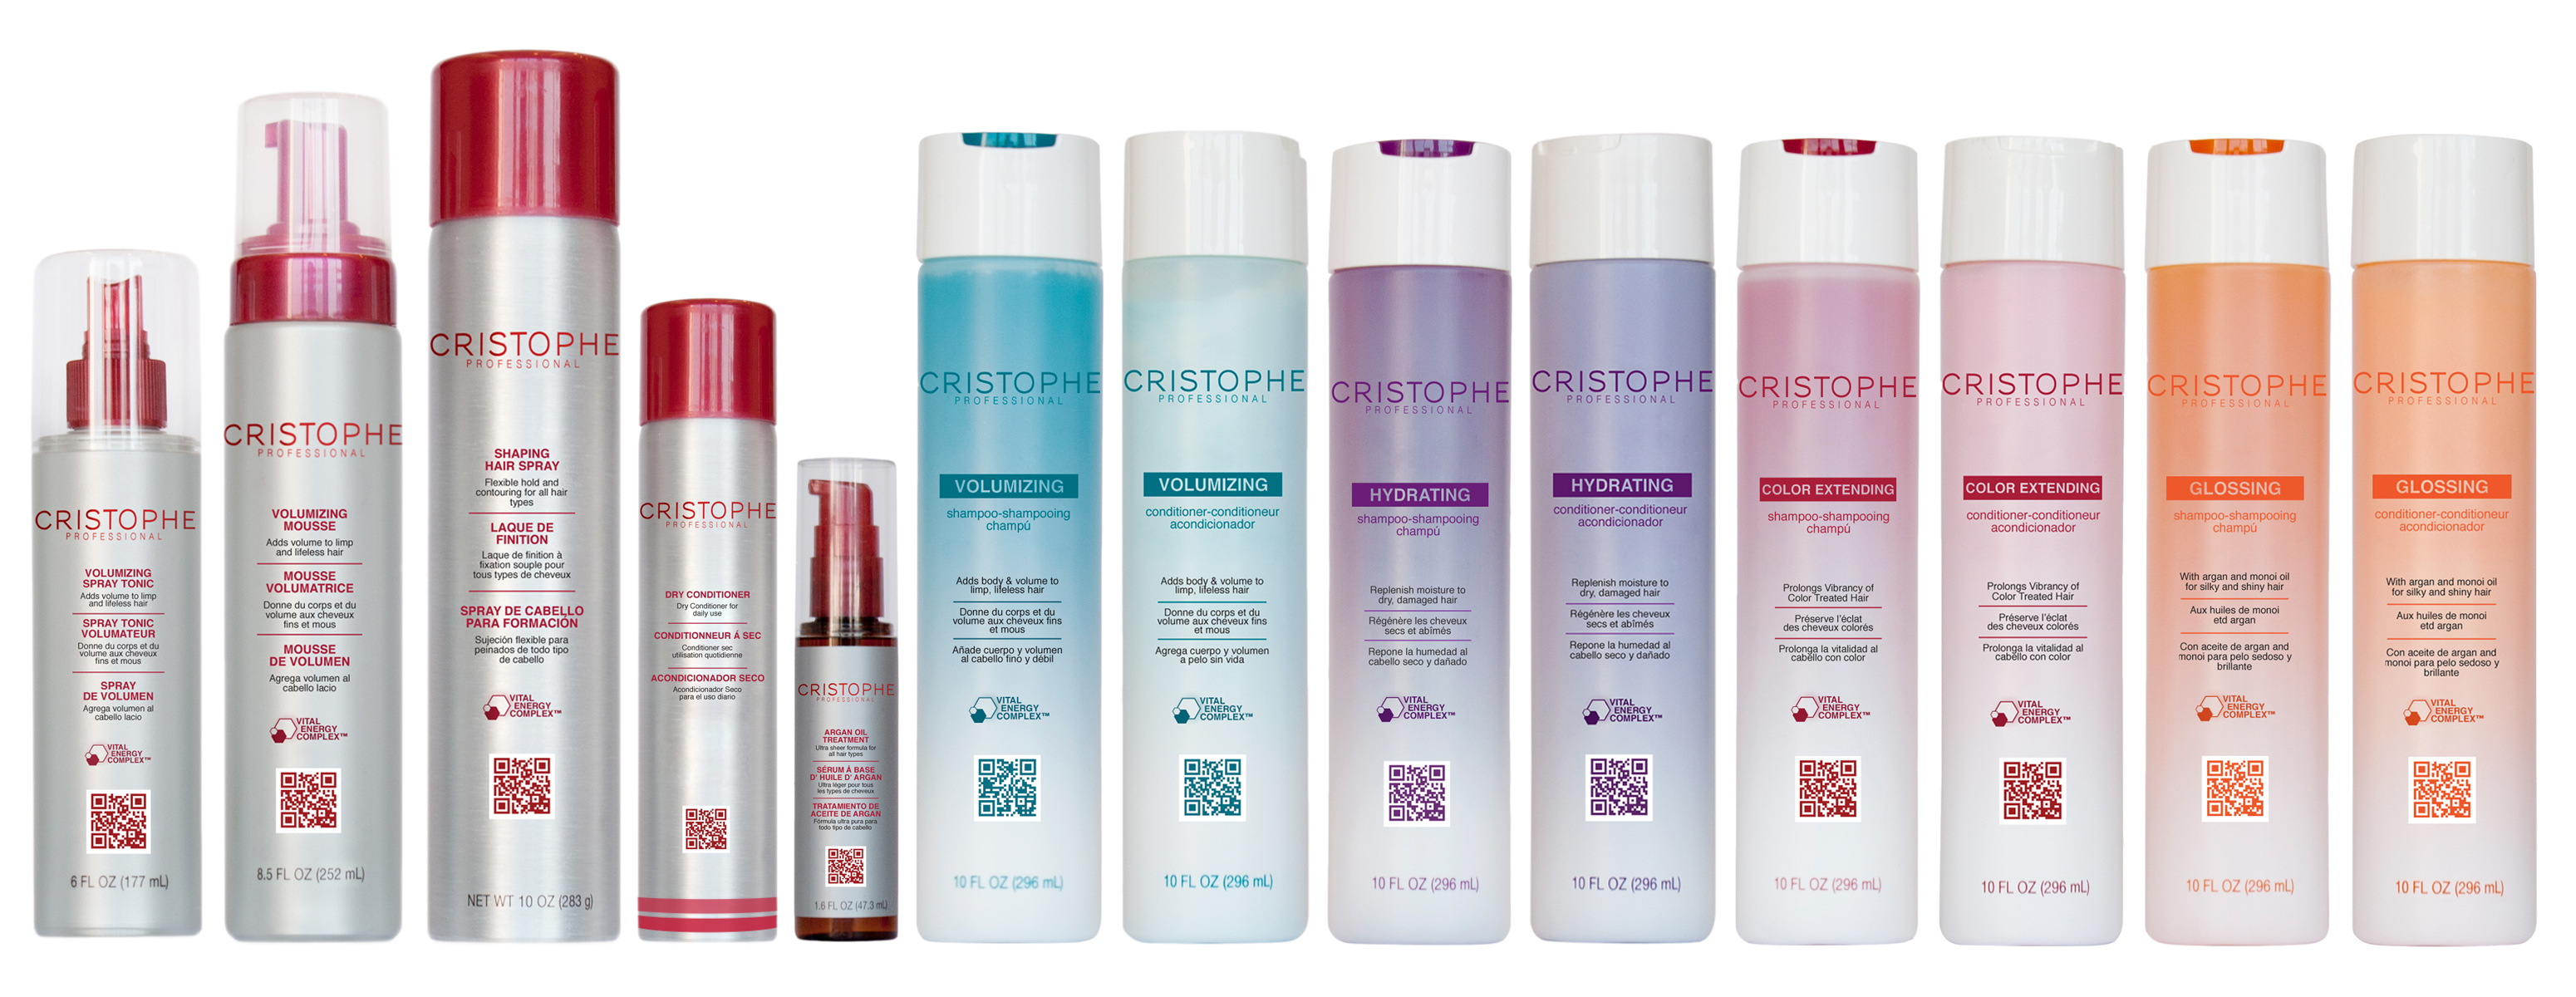 Hair Care Line Cristophe Professional Finds New Retail Home at ULTA Beauty